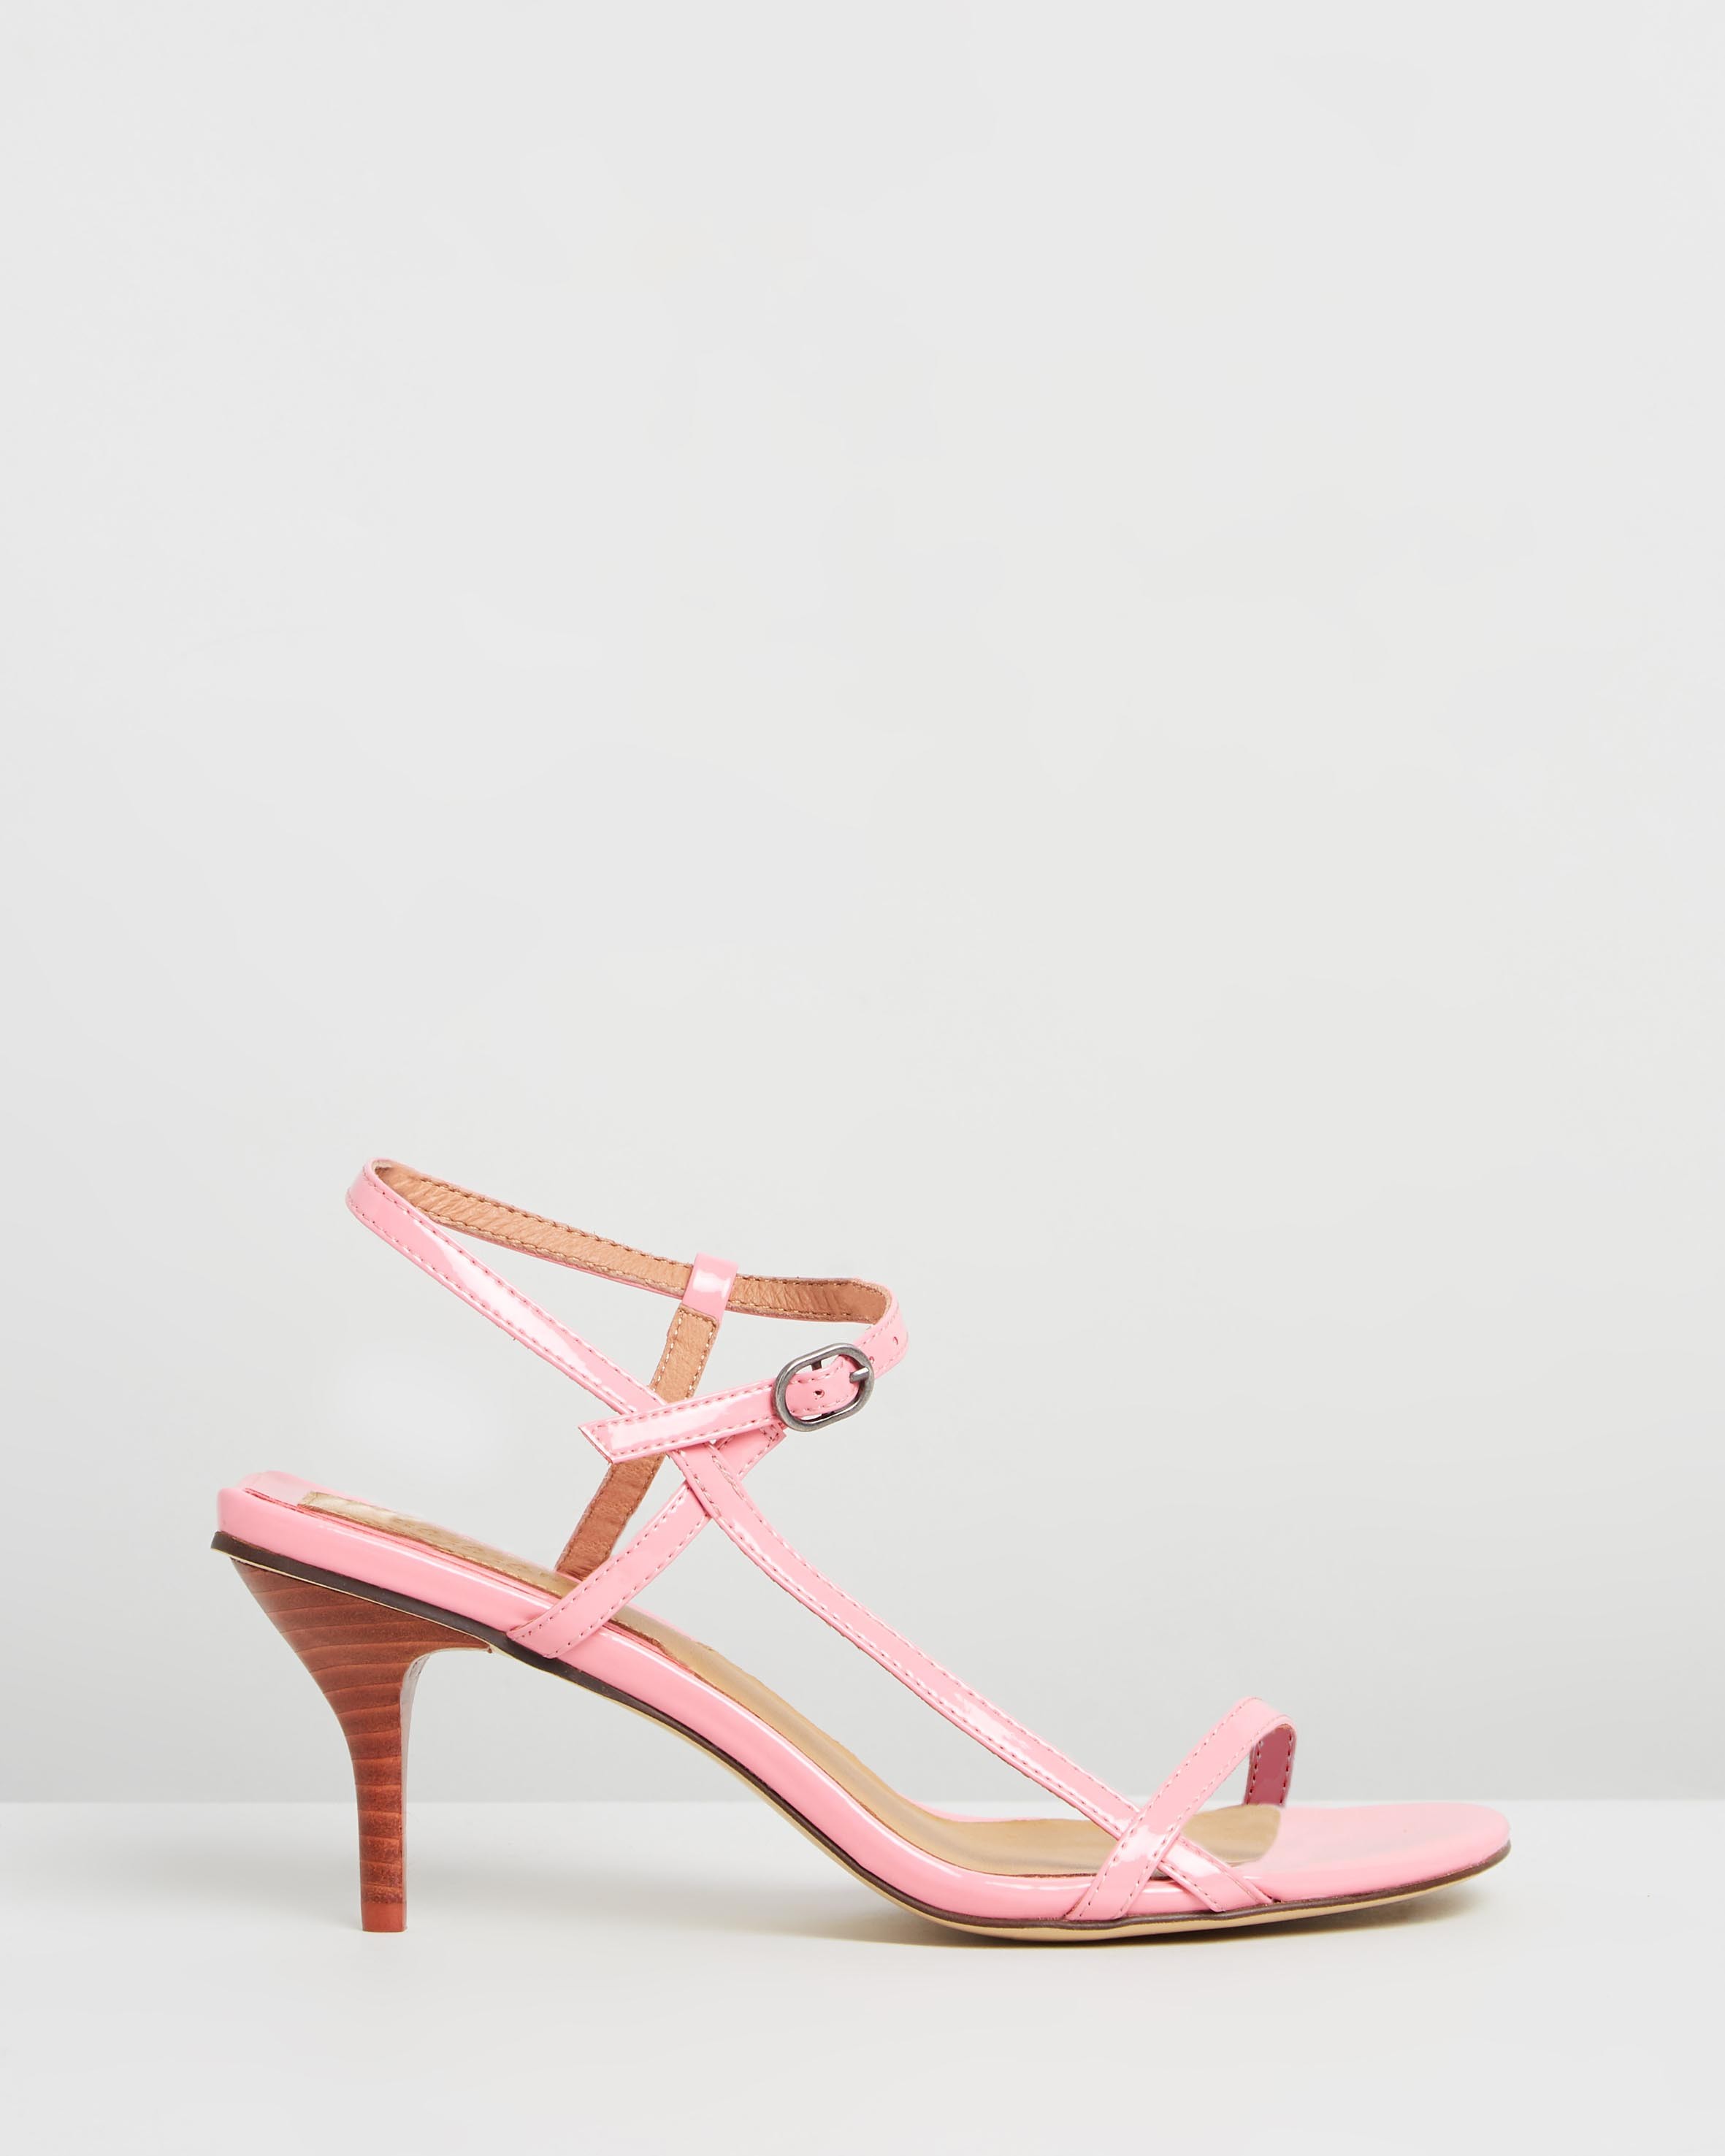 Strappy Patent Sandals Candy Pink by Jaggar The Label | ShoeSales